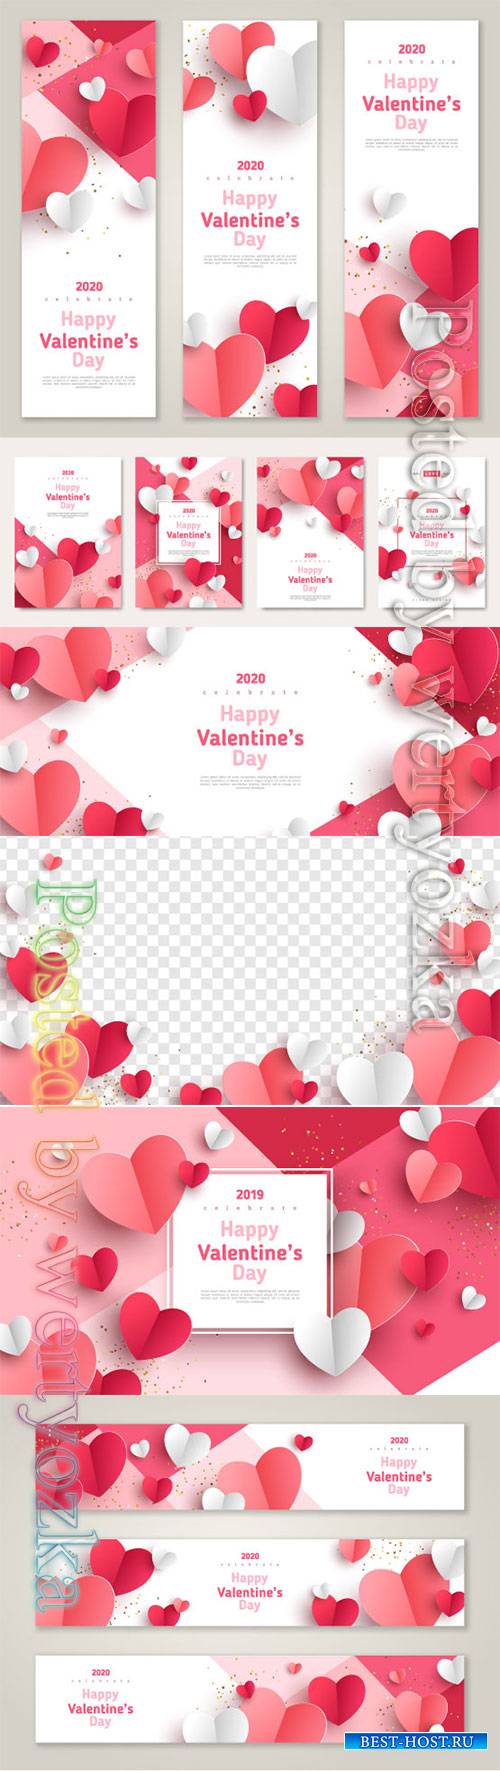 Valentines day vector background with heart # 3